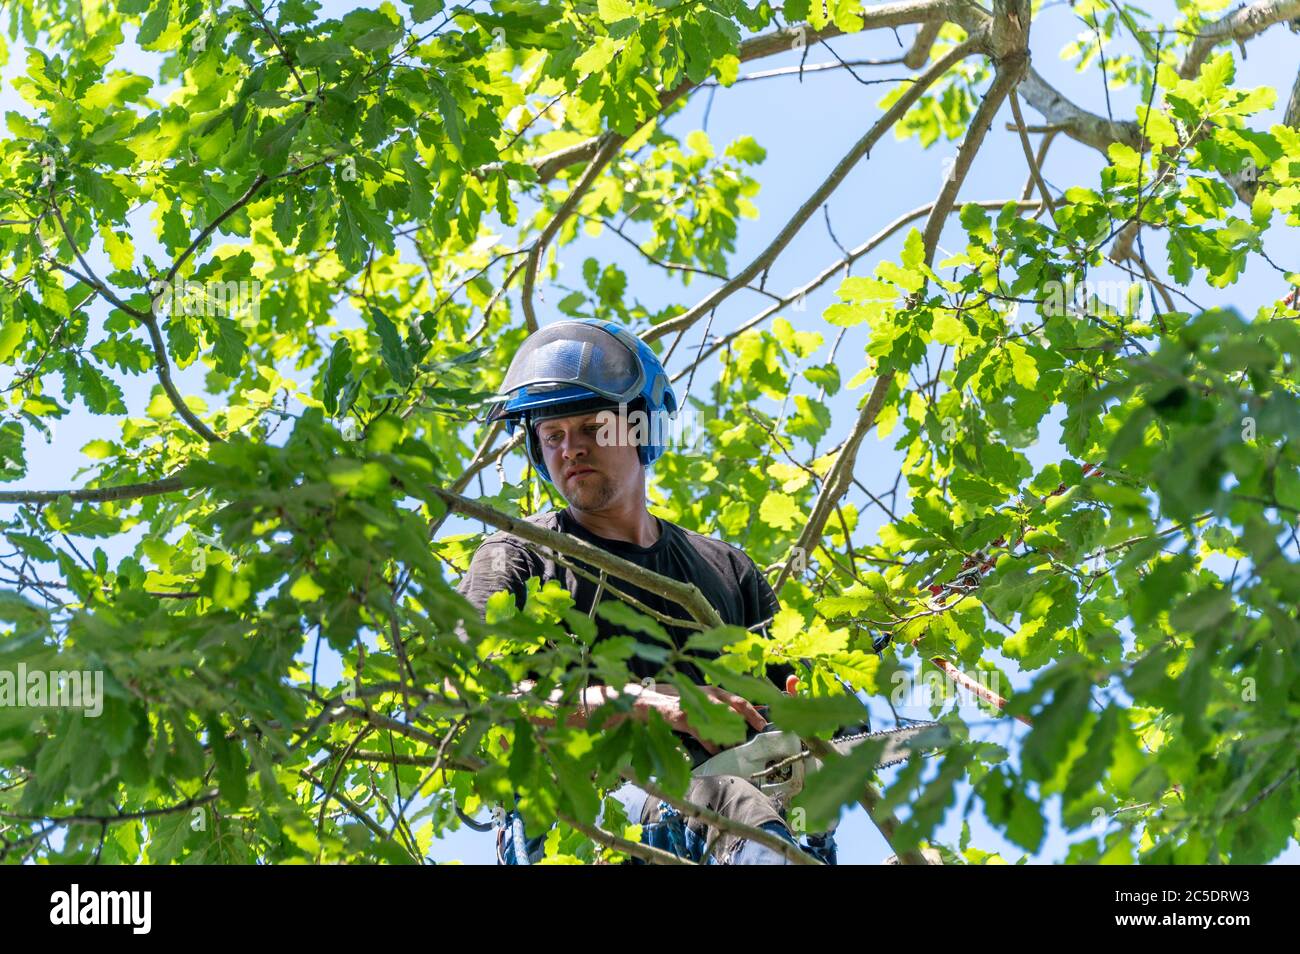 A Tree Surgeon or Arborist roped up in a tree's canopy ready to start work. Stock Photo